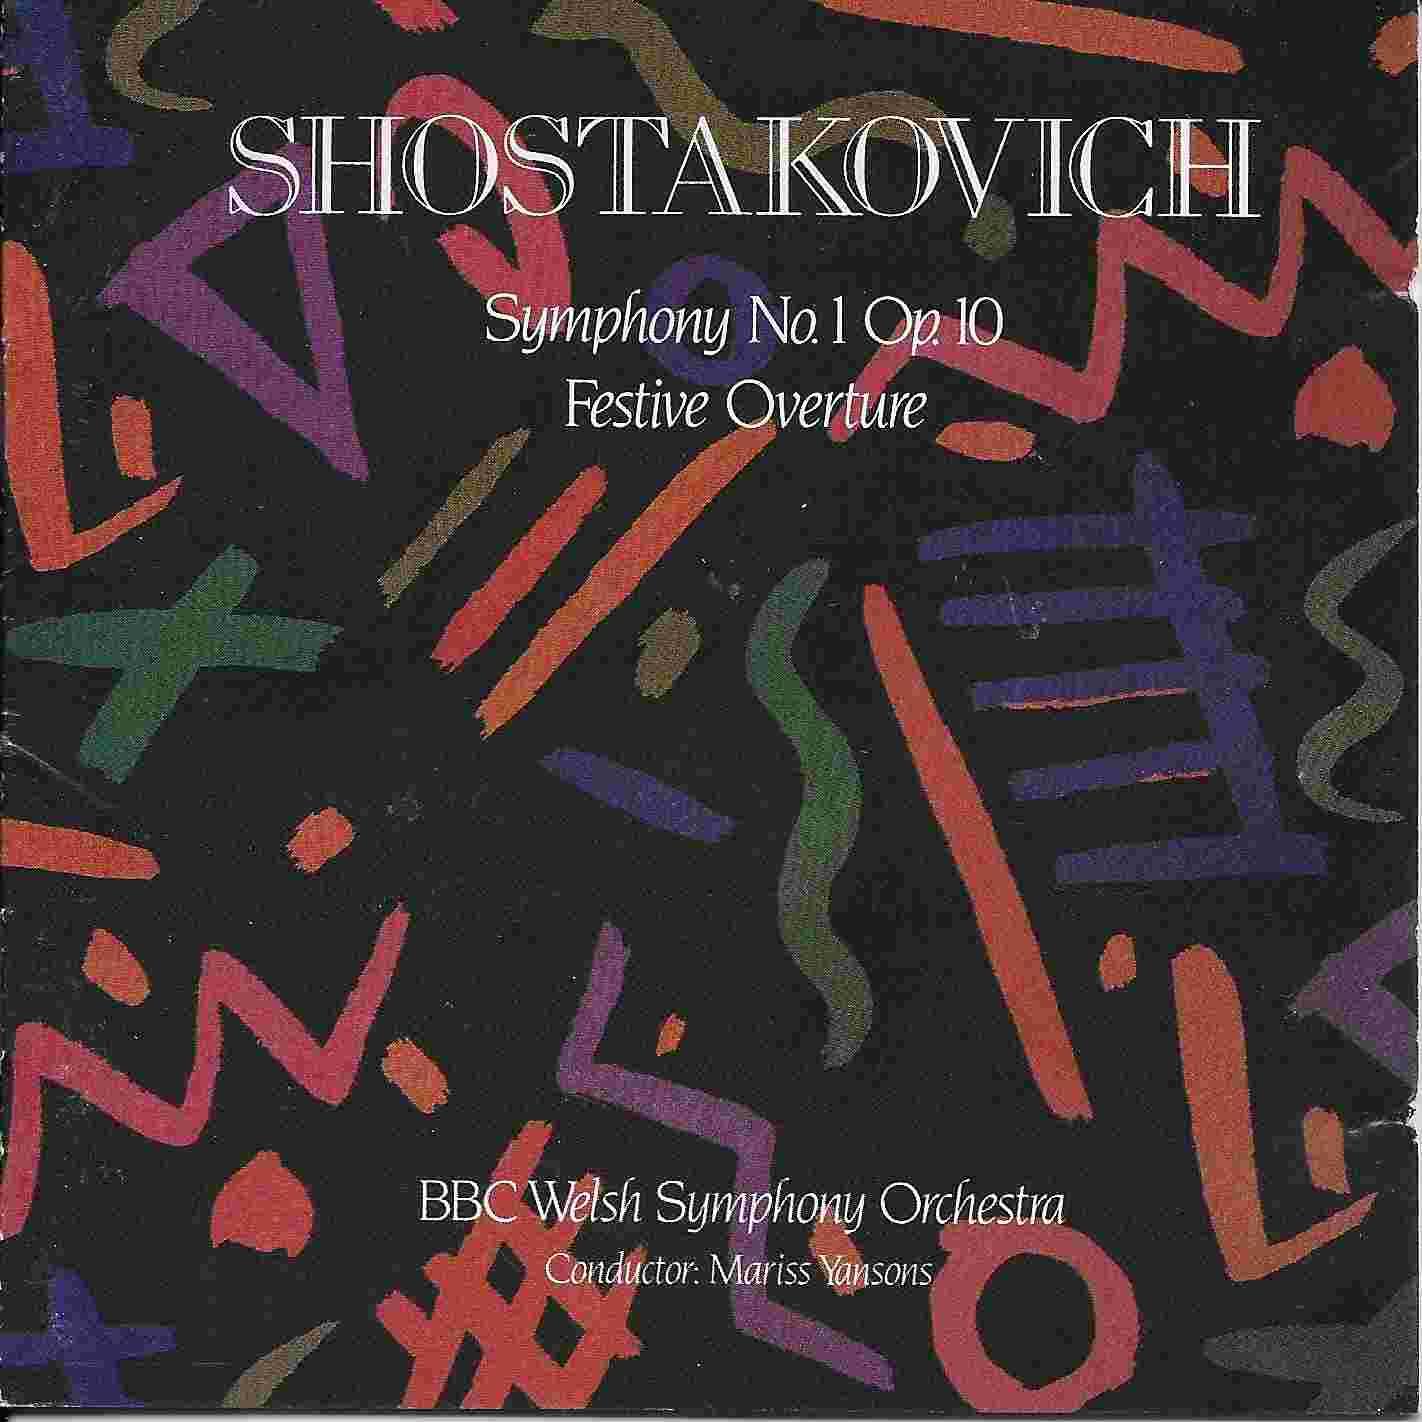 Picture of Shostakovich symphony no. 1 - Festival overture by artist Dmitri Shostakovich from the BBC cds - Records and Tapes library